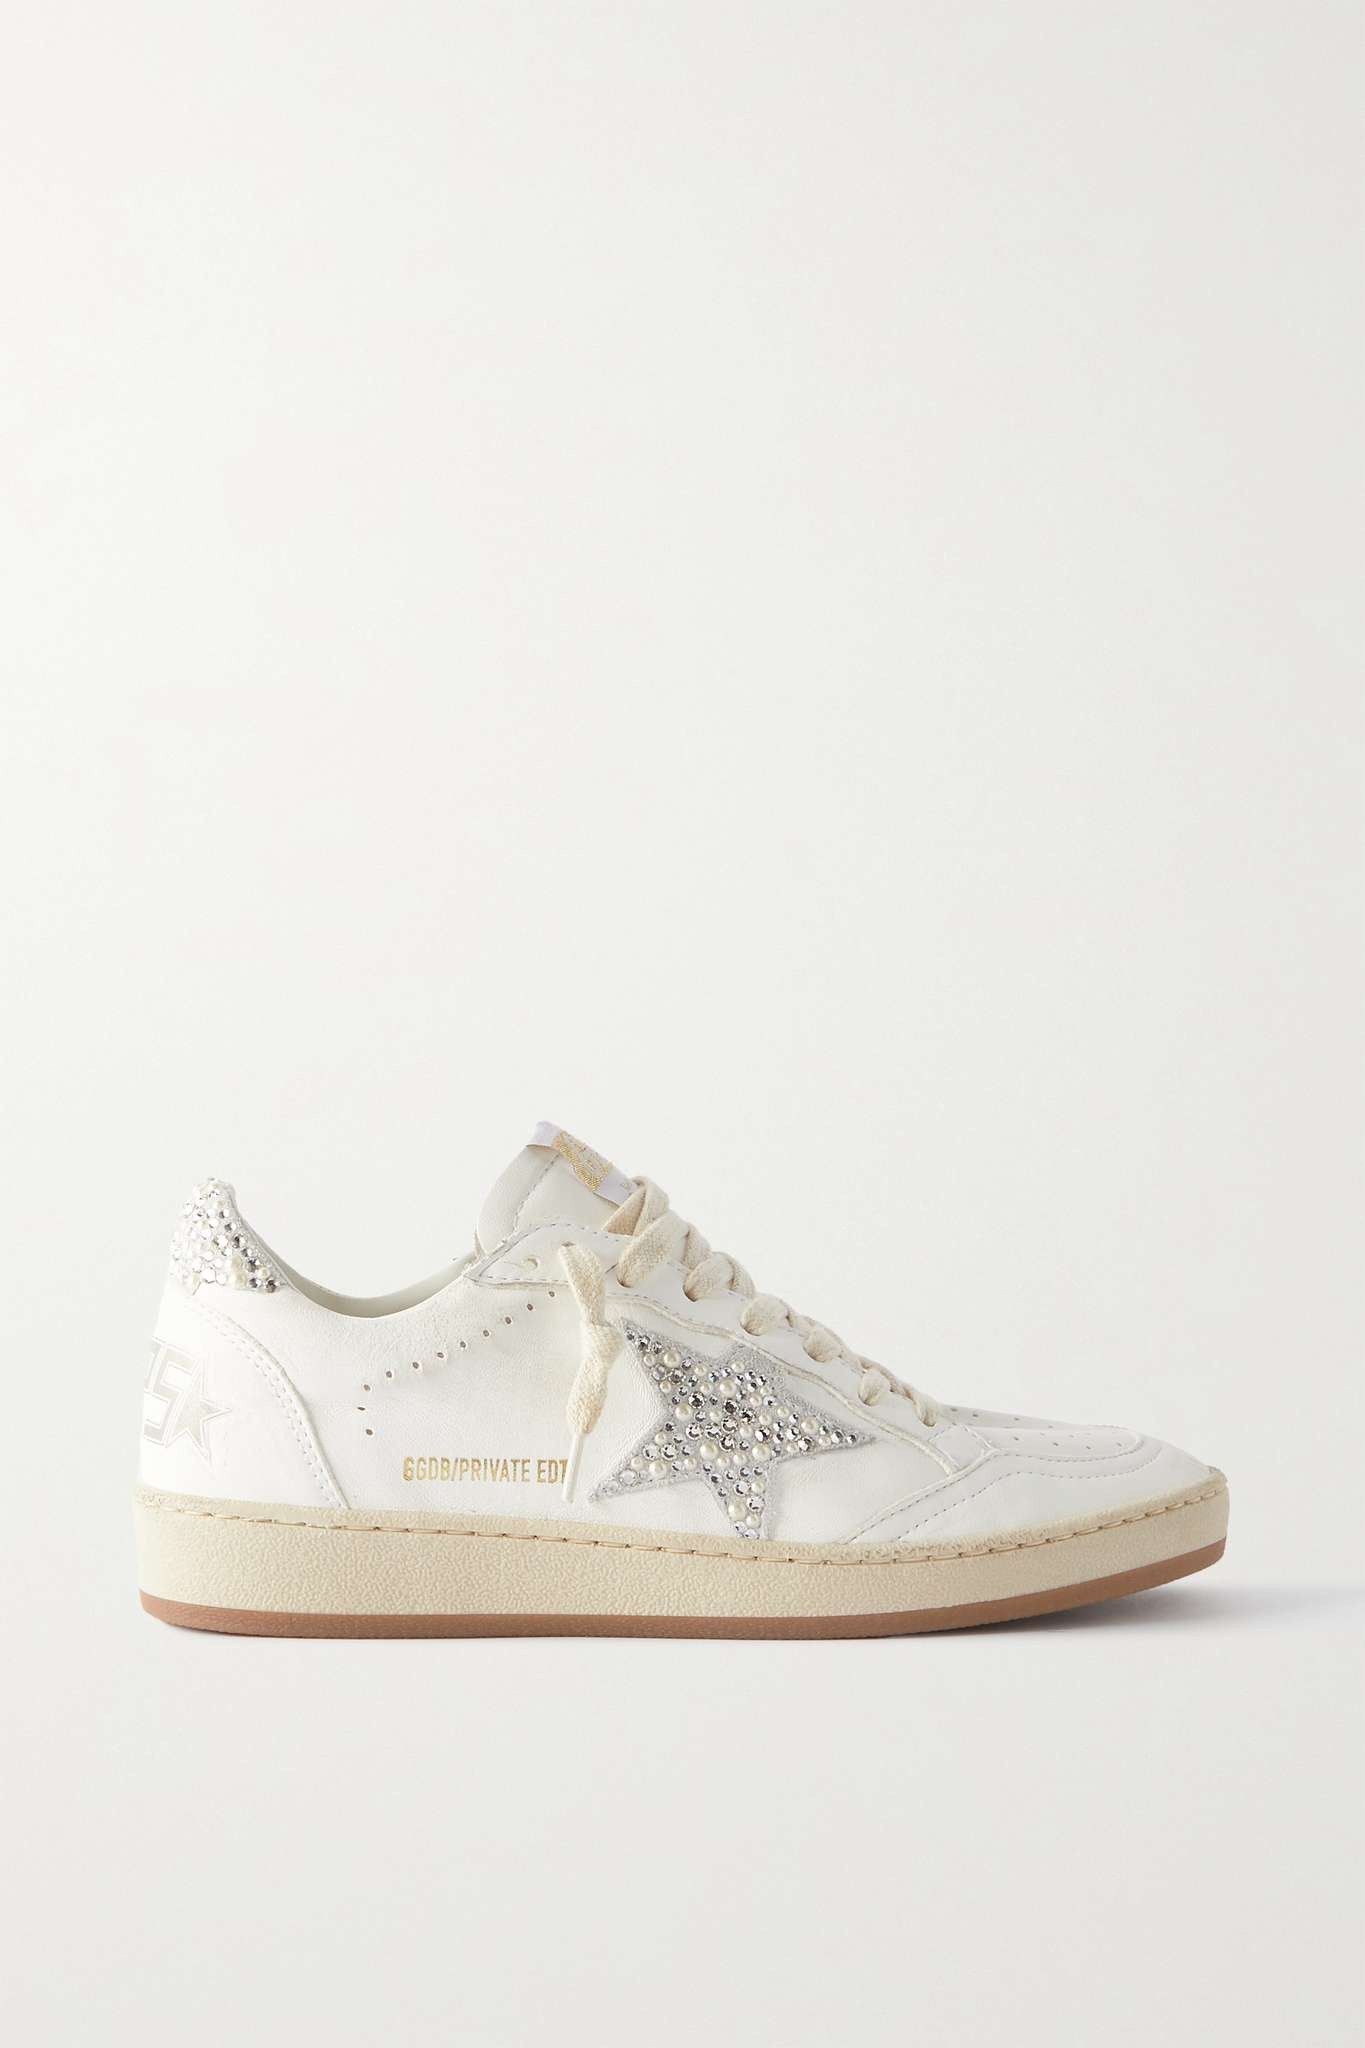 Ball Star shearling-lined embellished distressed leather sneakers - 1